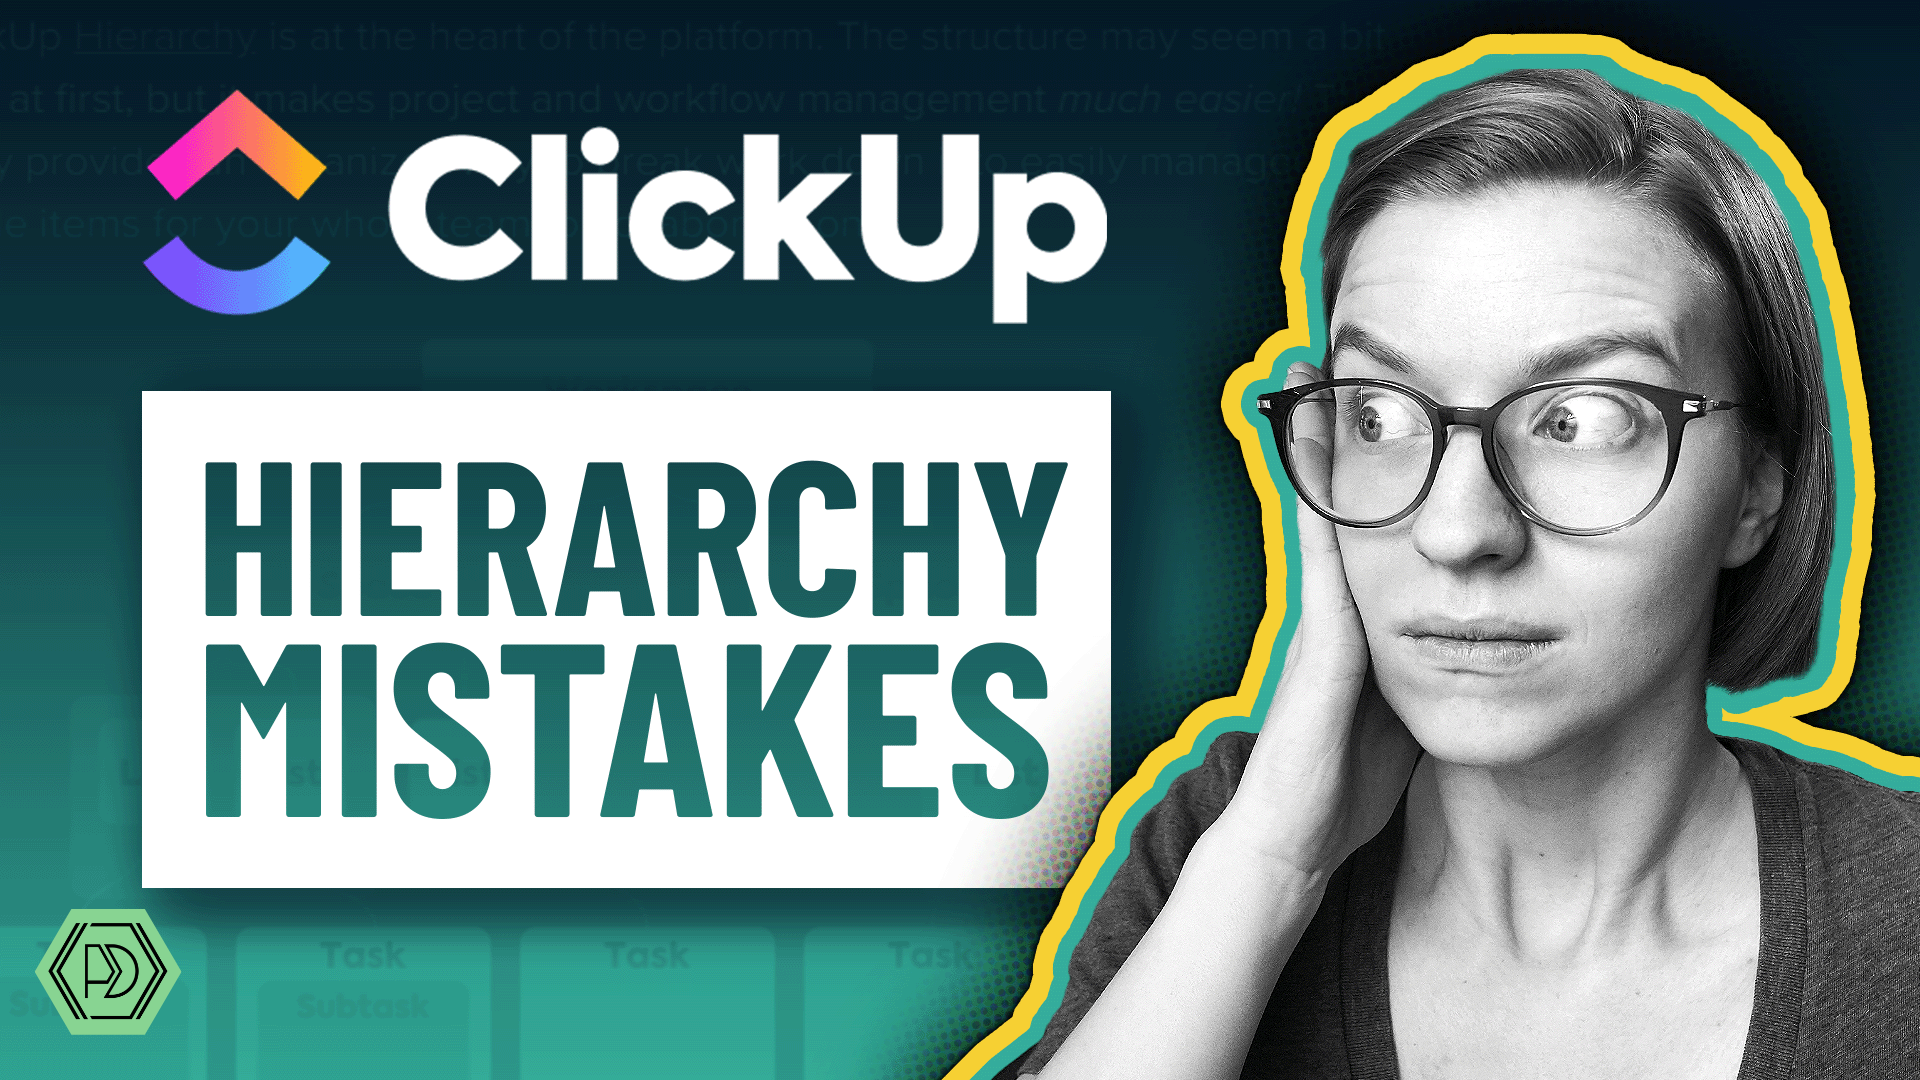 How NOT to Setup ClickUp (4 ClickUp Hierarchy Mistakes) ProcessDriven